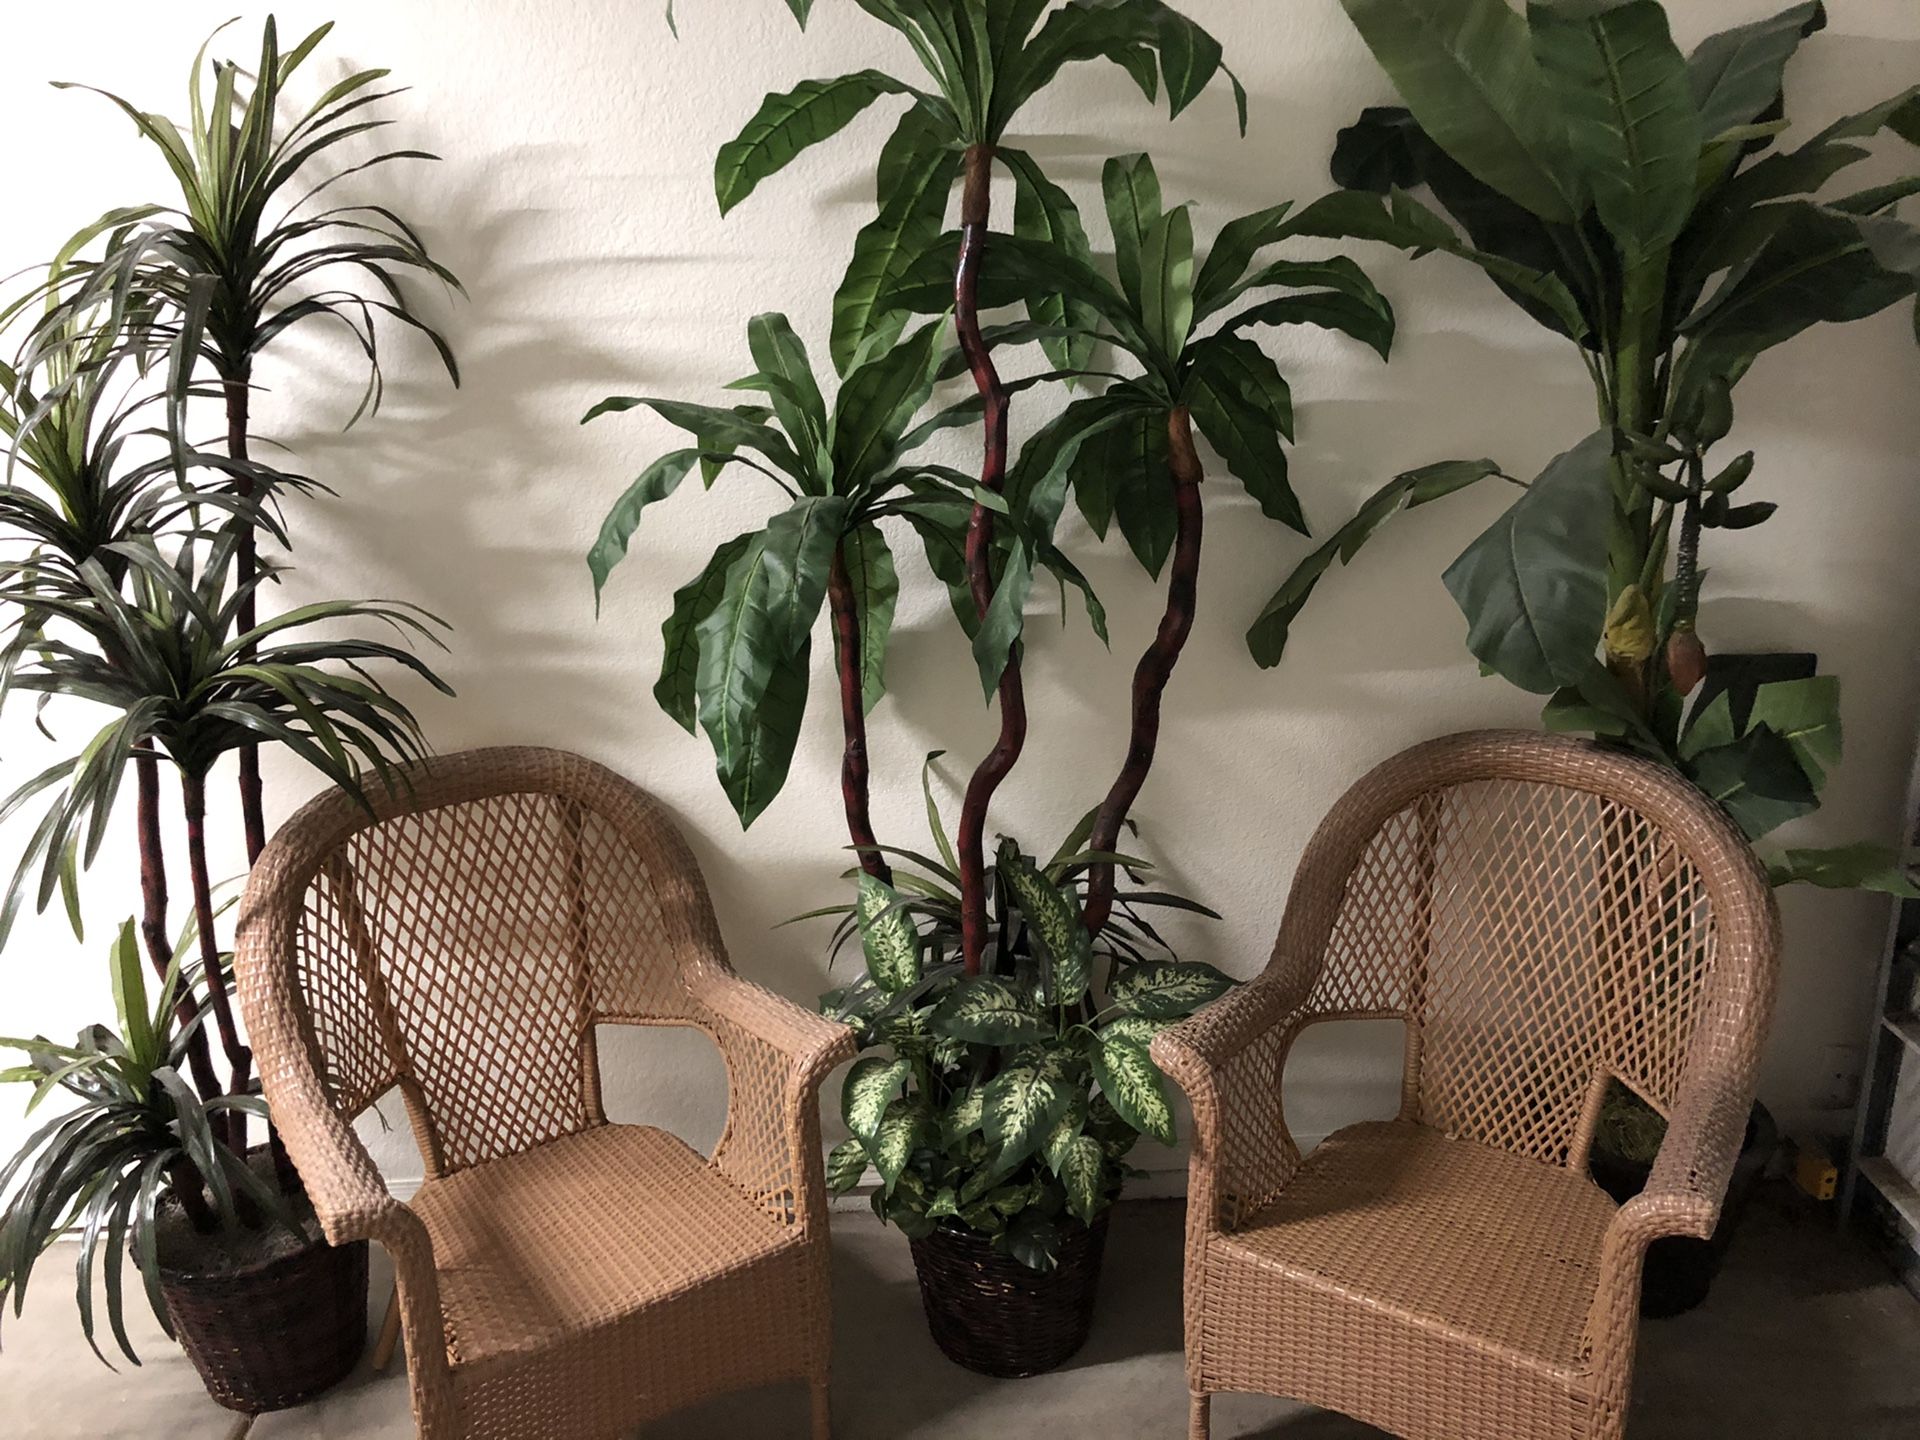 Chair and fake palms